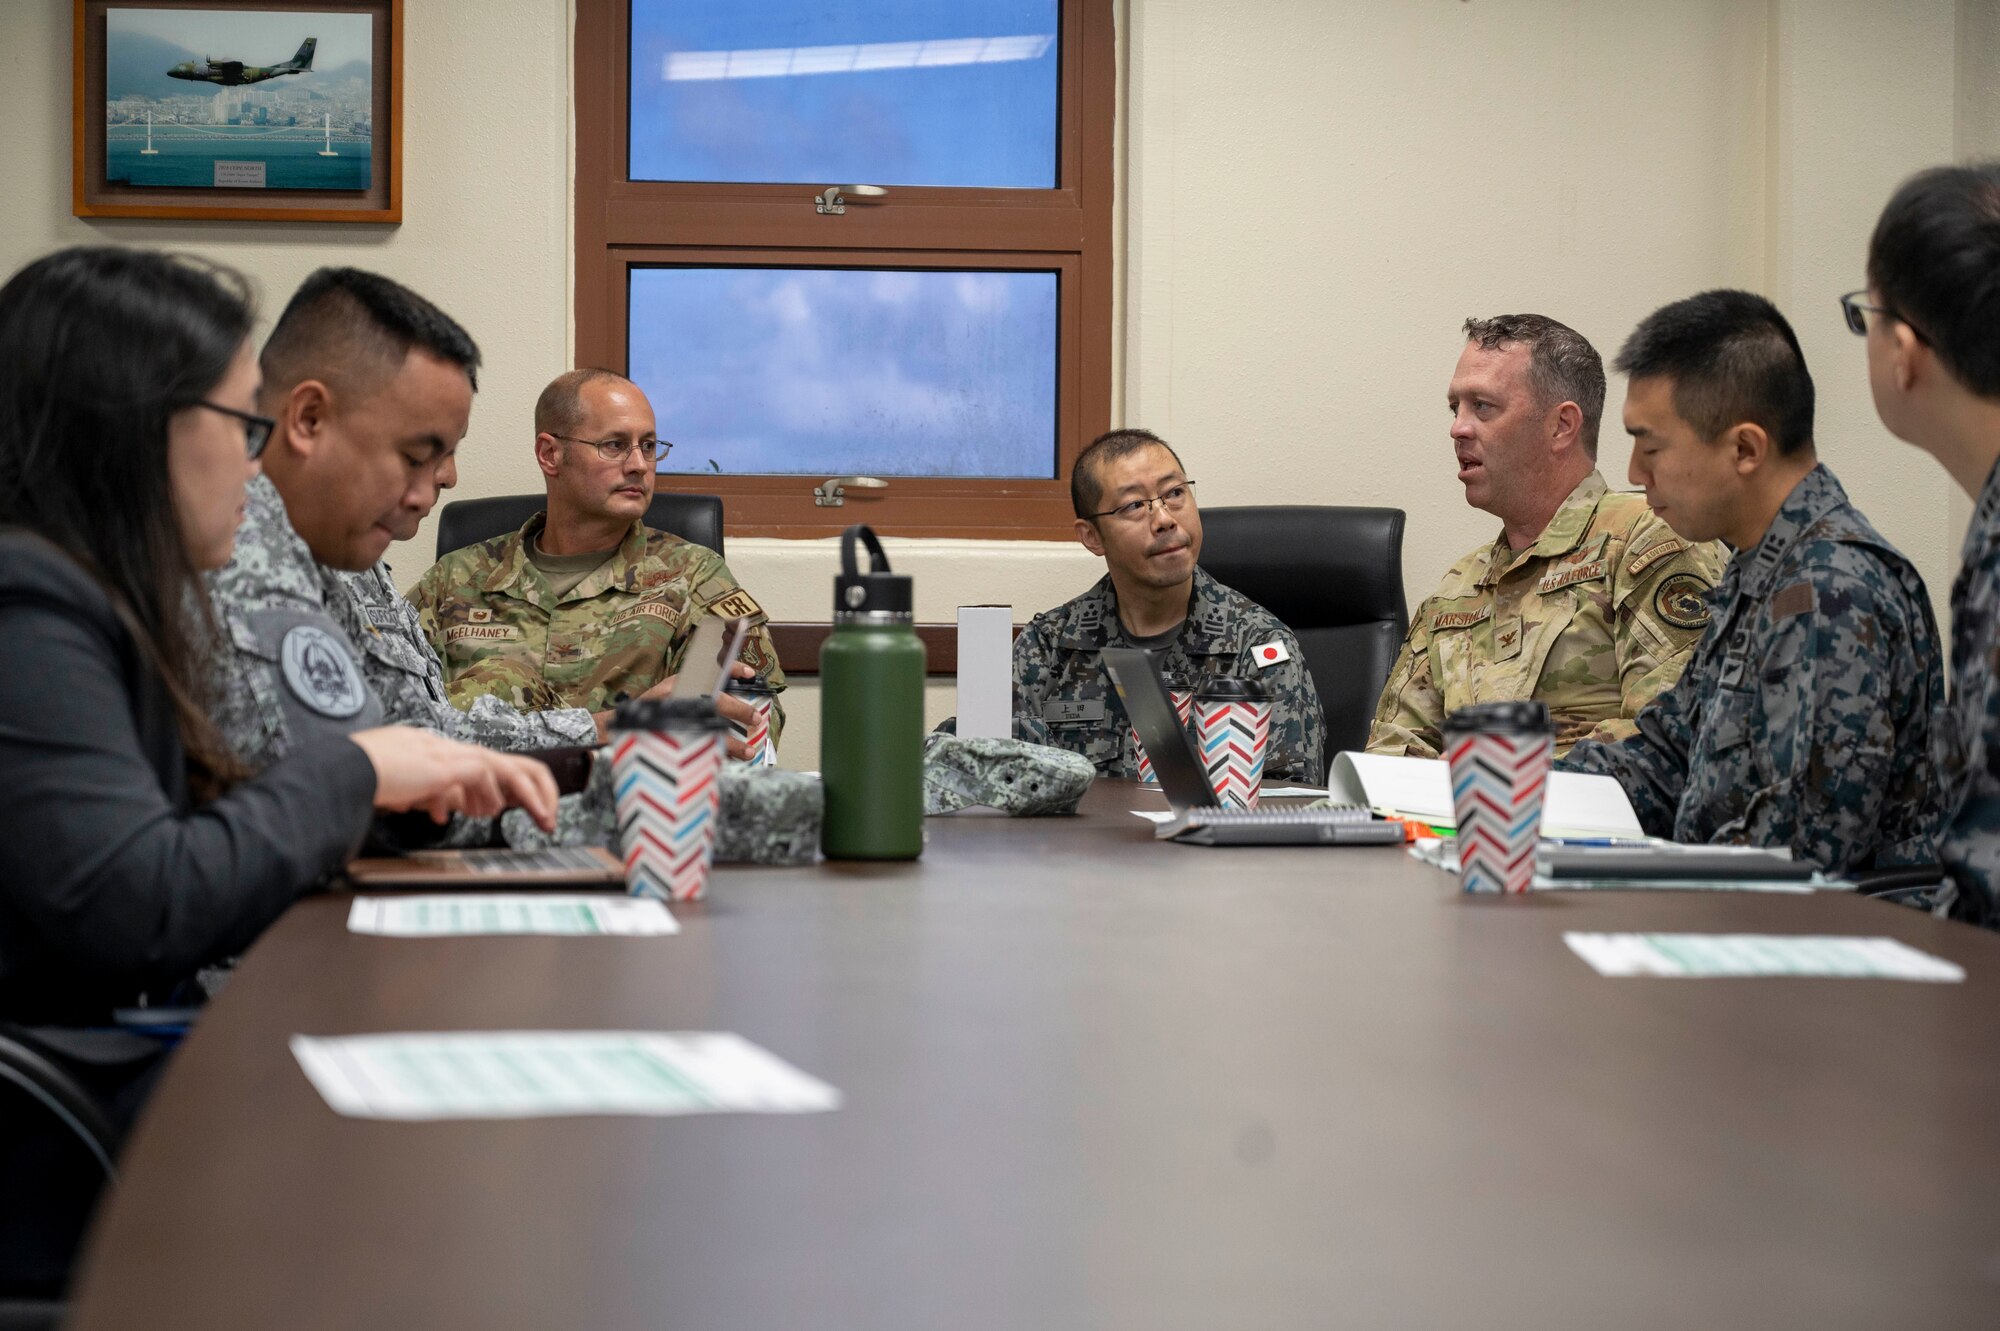 U.S. Air Force, Philippine Air Force and Japan Air Self-Defense Force leaders have a discussion at Andersen Air Force Base, Guam, Nov. 2, 2023. The 36th Contingency Response Group and the 36th Tactical Advisory Squadron hosted a trilateral discussion to facilitate discussions on regional security concerns, humanitarian aid and disaster relief, exercises, and operations. (U.S. Air Force photo by Senior Airman Emily Saxton)